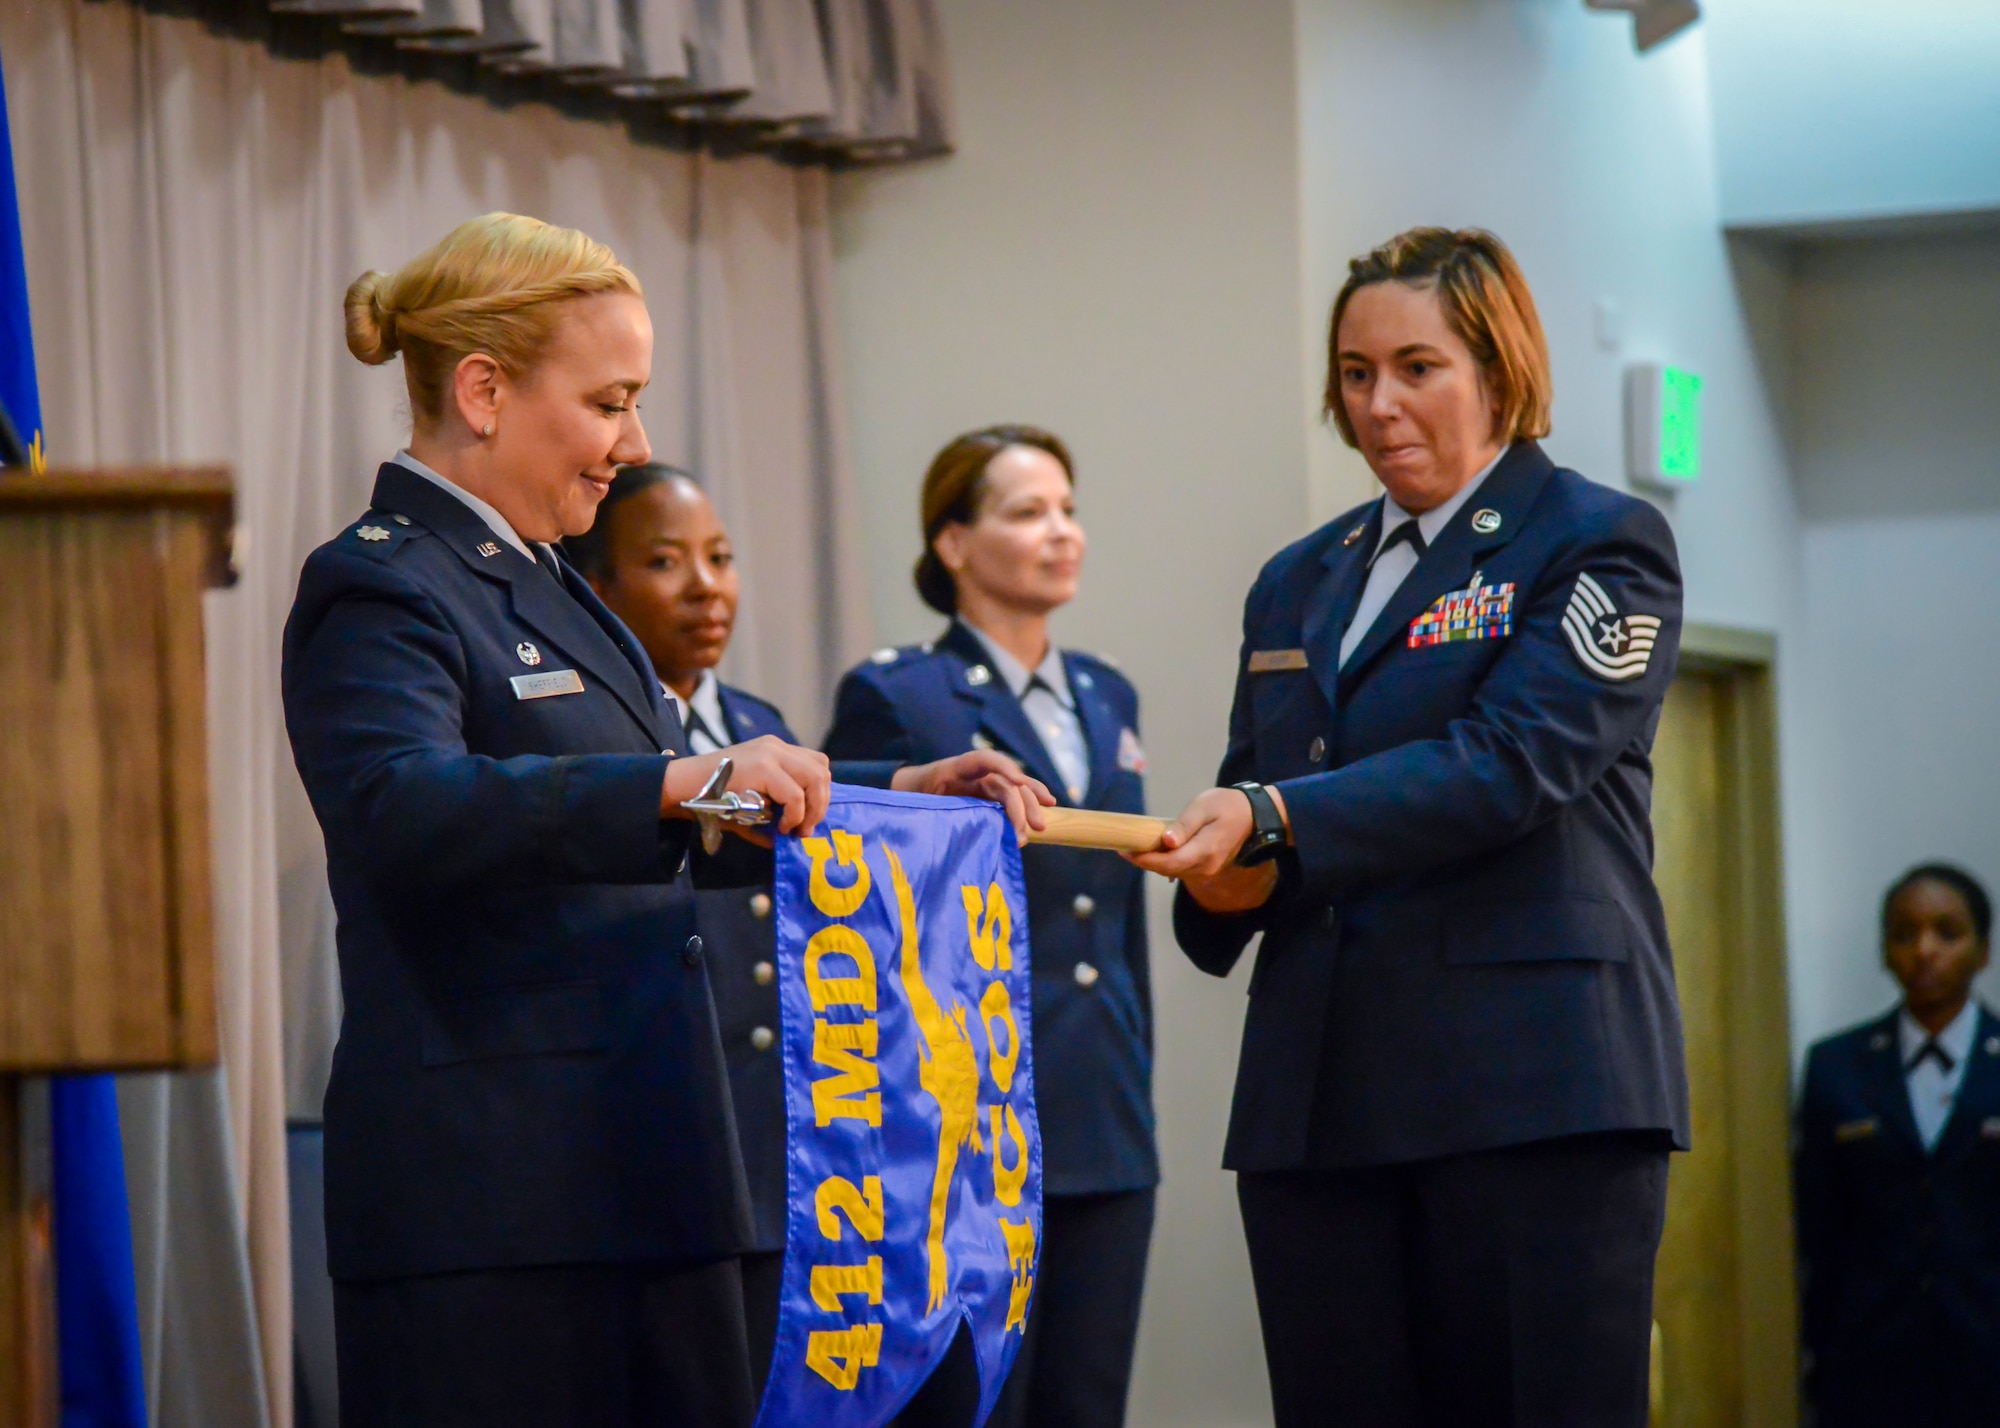 Lt. Col. Jennie Sheffield, the new 412th Health Care Operations Squadron Commander, unfurls the new unit’s guidon during an inactivation and redesgination ceremony at Edwards Air Force Base, July 12. The 412th Medical Support Squadron was inactivated its Airmen moved to the 412th Medical Operations Squadron which was then redesignated as the 412th Health Care Operations Squadron. (U.S. Air Force photo by Giancarlo Casem)